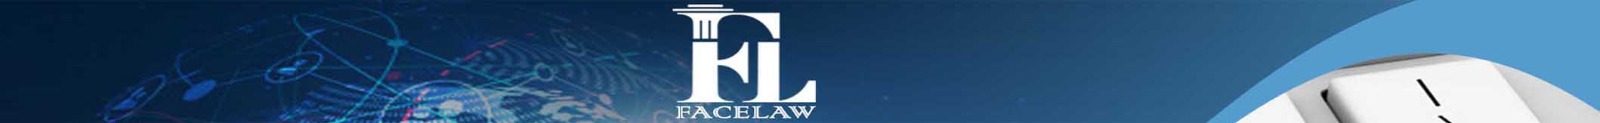 list of wills and estates lawyers in toronto